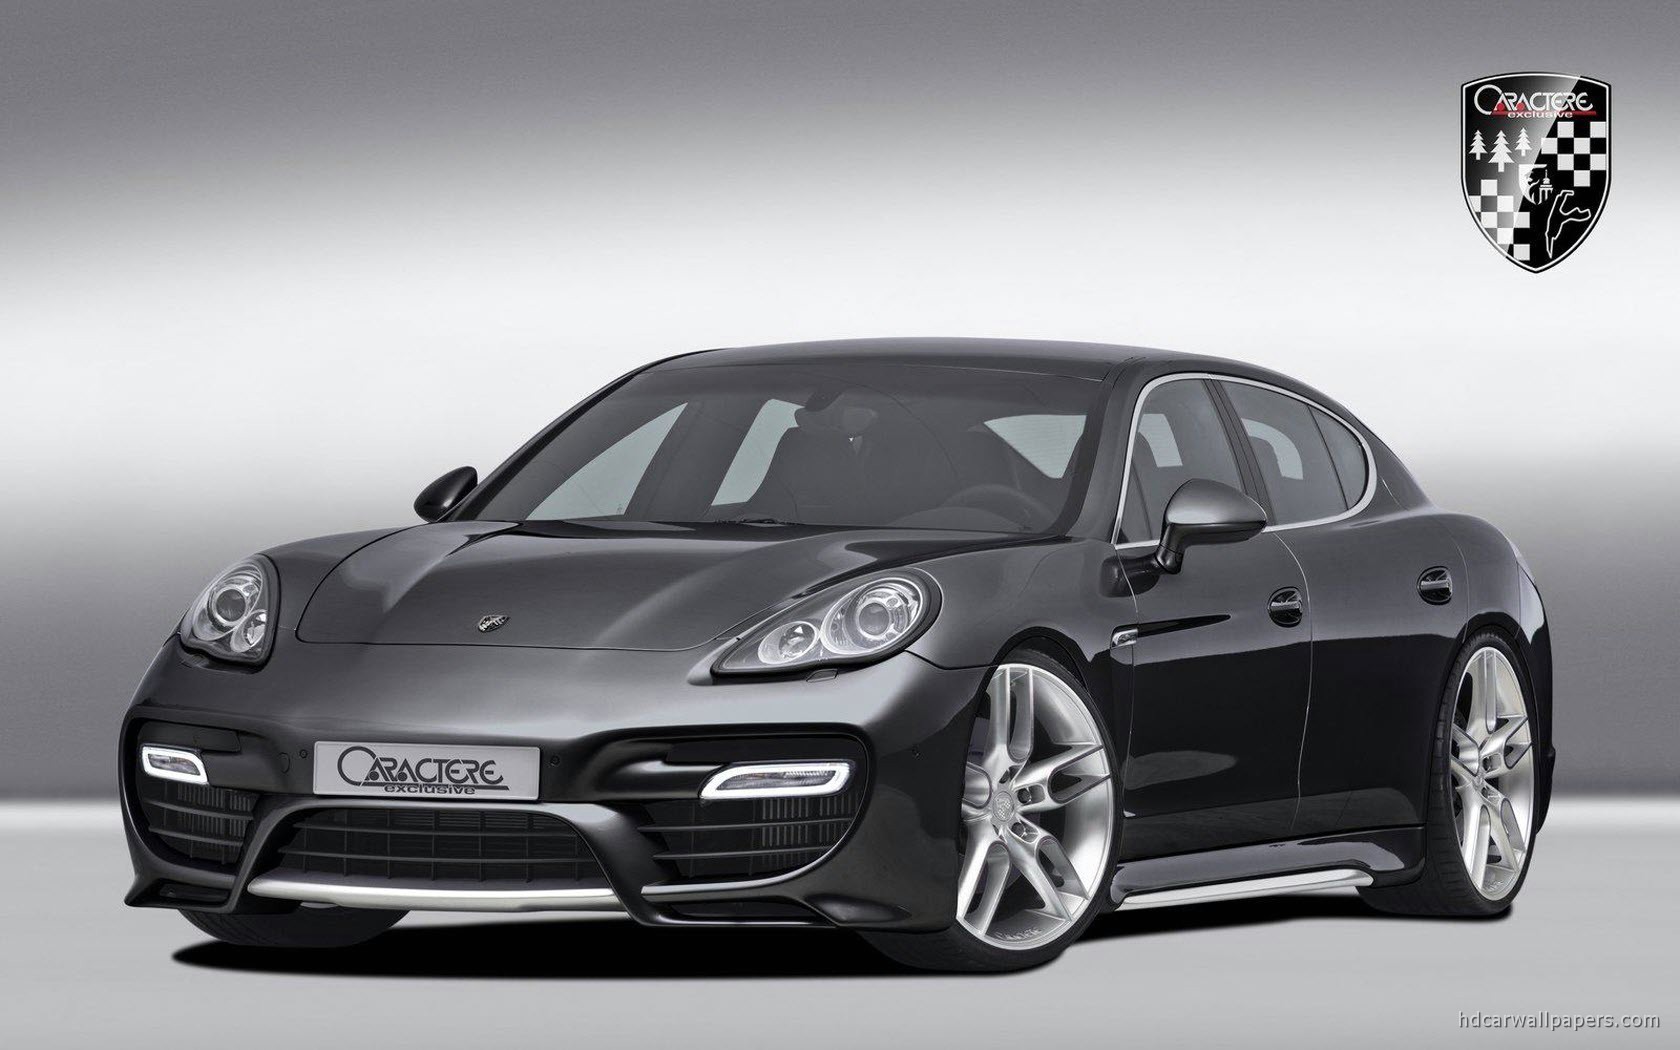 images-products-1-7474-232987954-caractere_porsche_panamera-wide.jpg